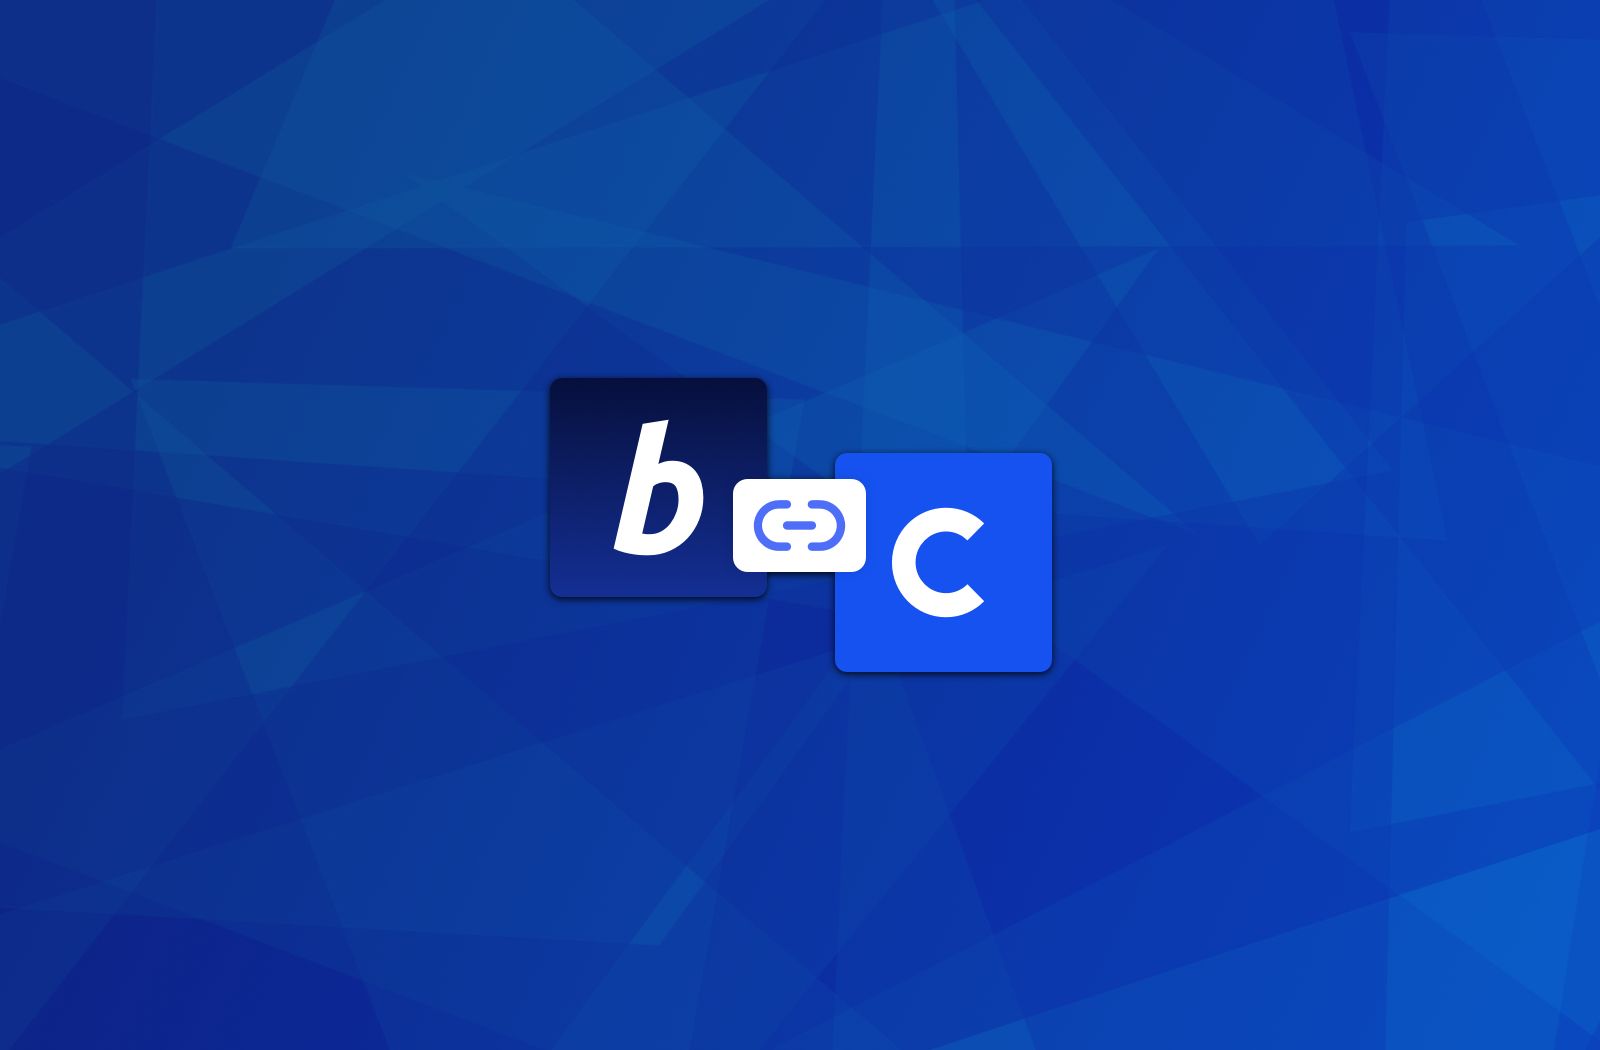 Coinbase users can now instantly pay BitPay merchants directly from their Coinbase account